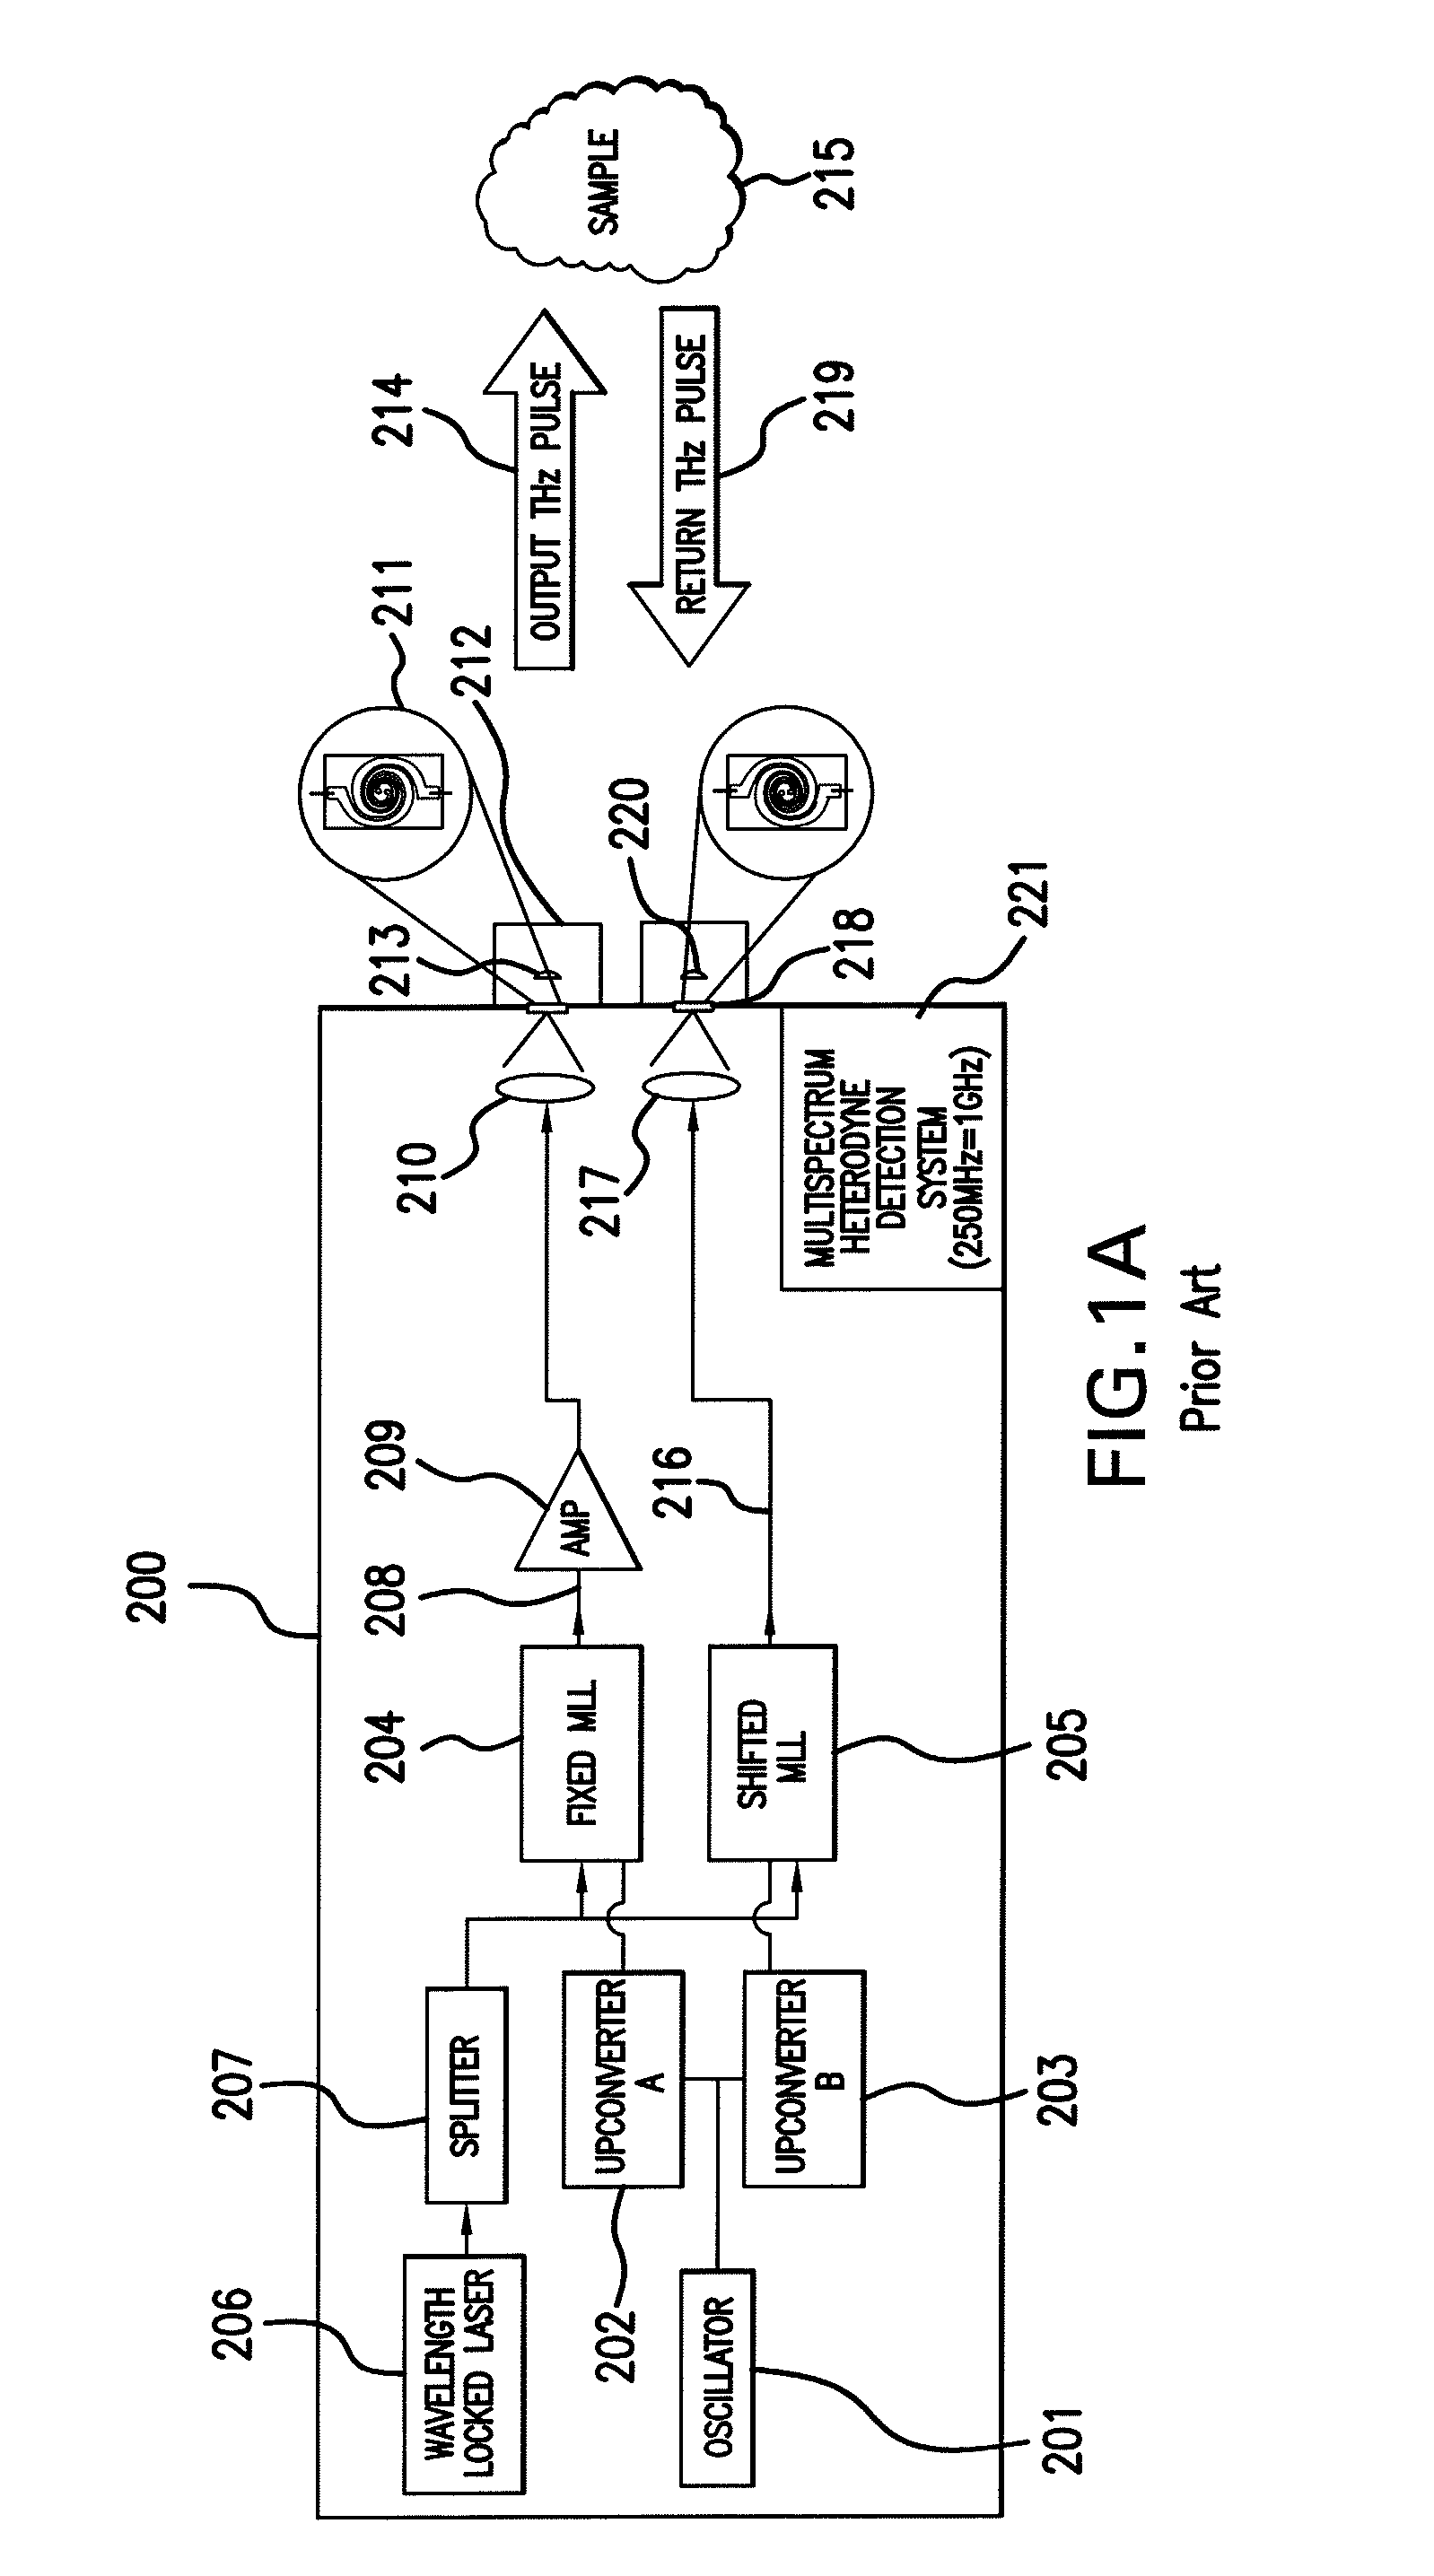 Terahertz frequency domain spectrometer with integrated dual laser module